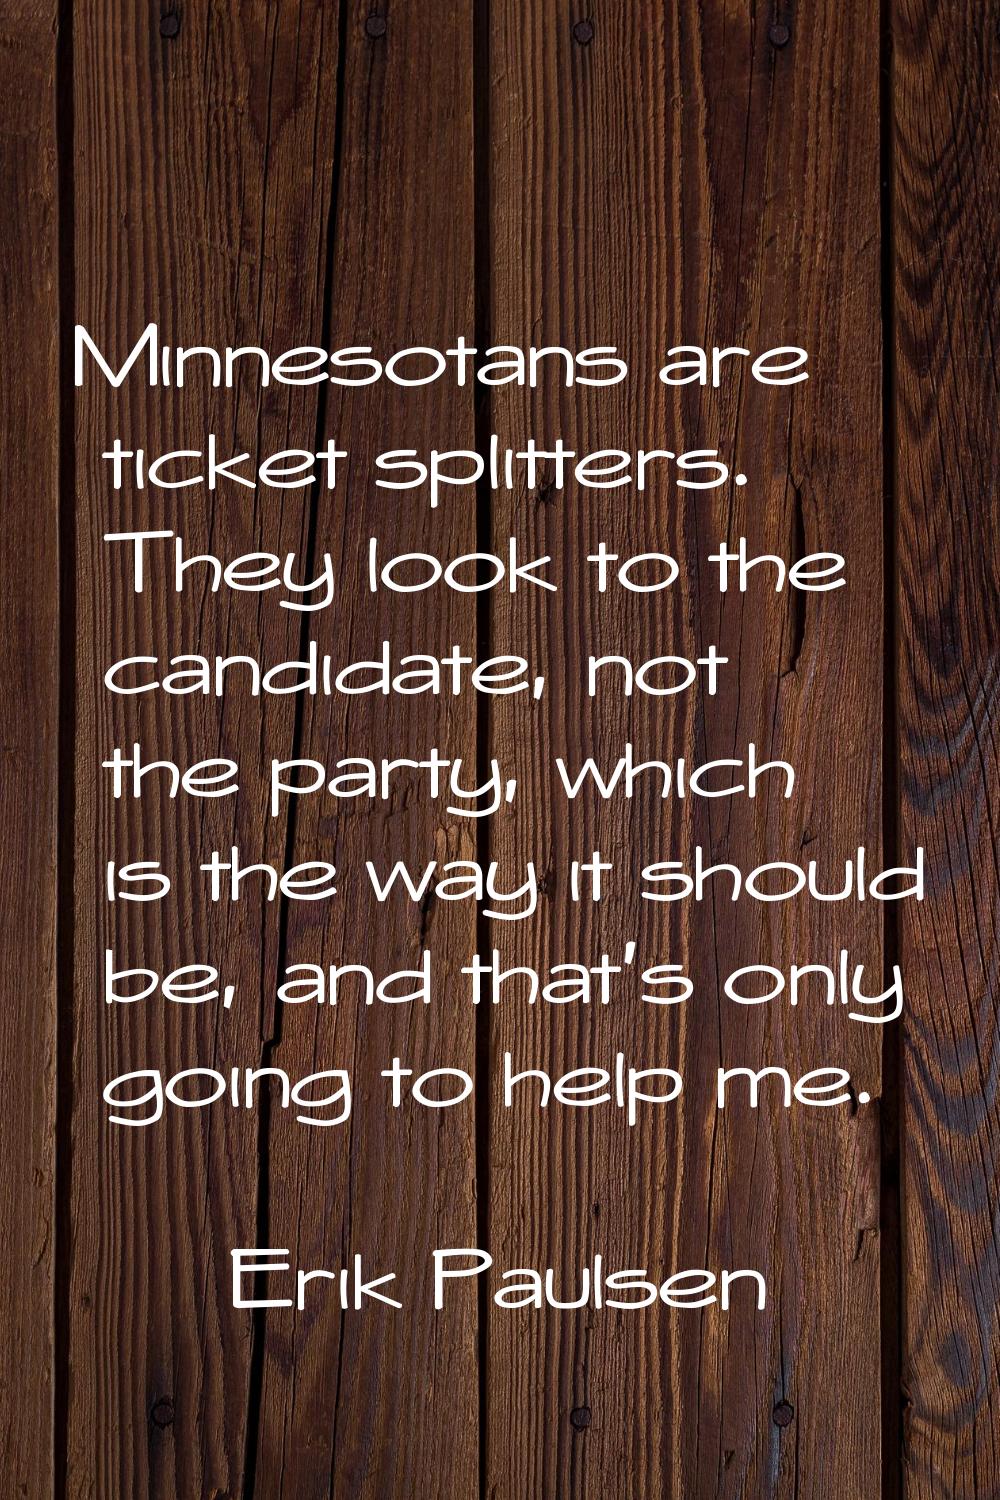 Minnesotans are ticket splitters. They look to the candidate, not the party, which is the way it sh